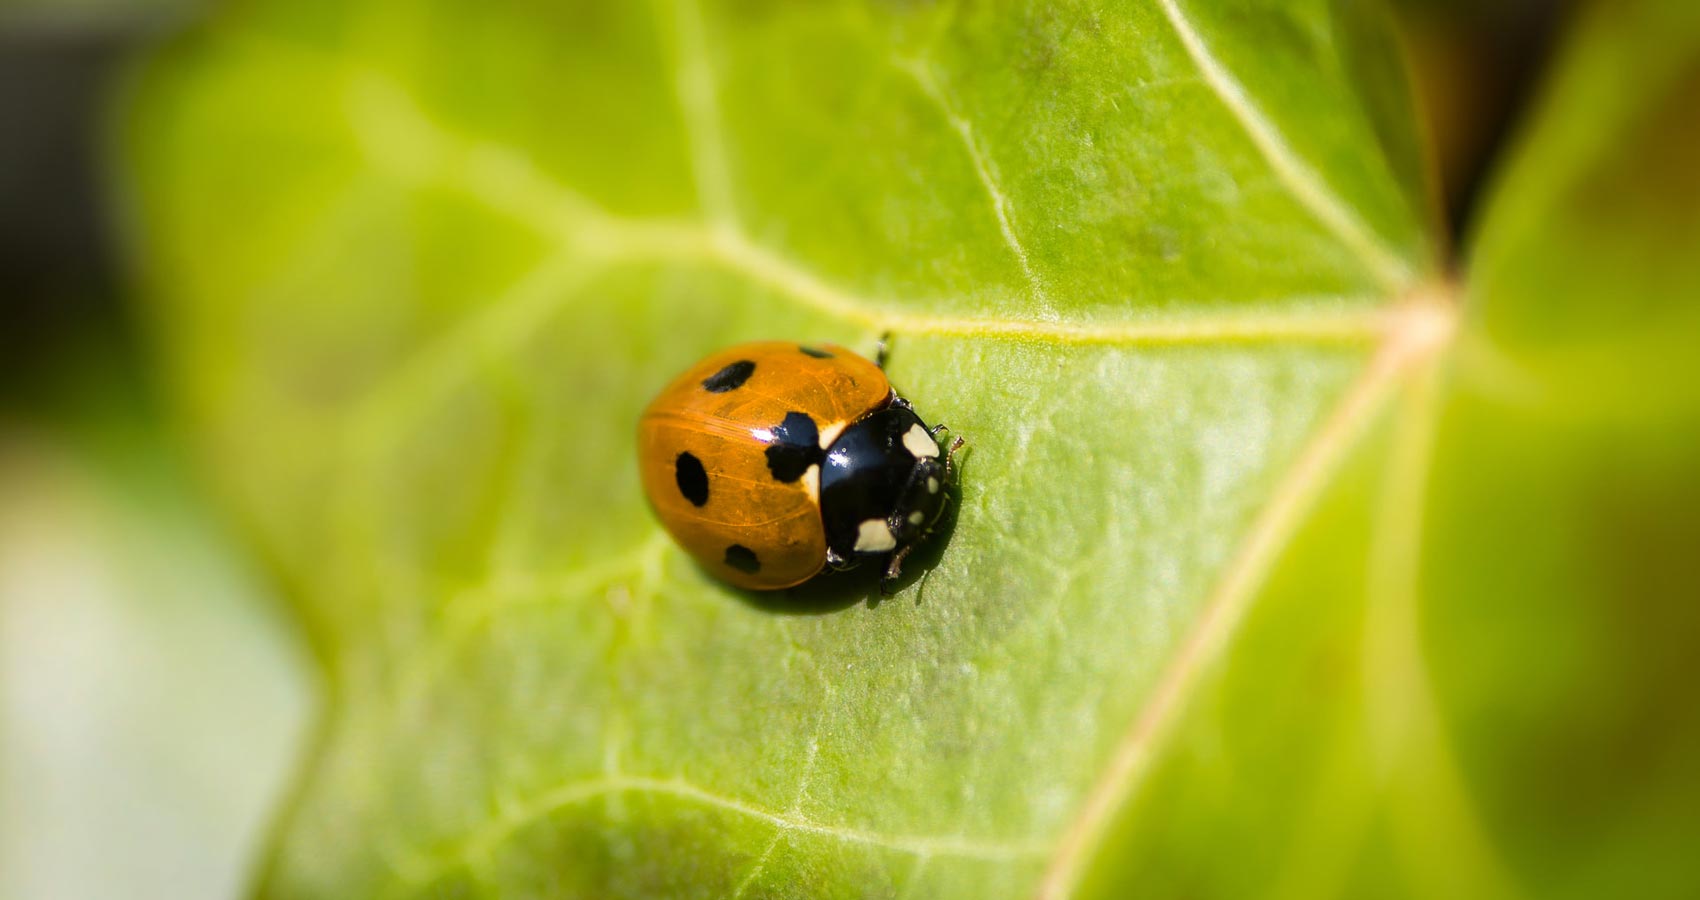 Ladybird Life, poetry written by DJ Elton at Spillwords.com